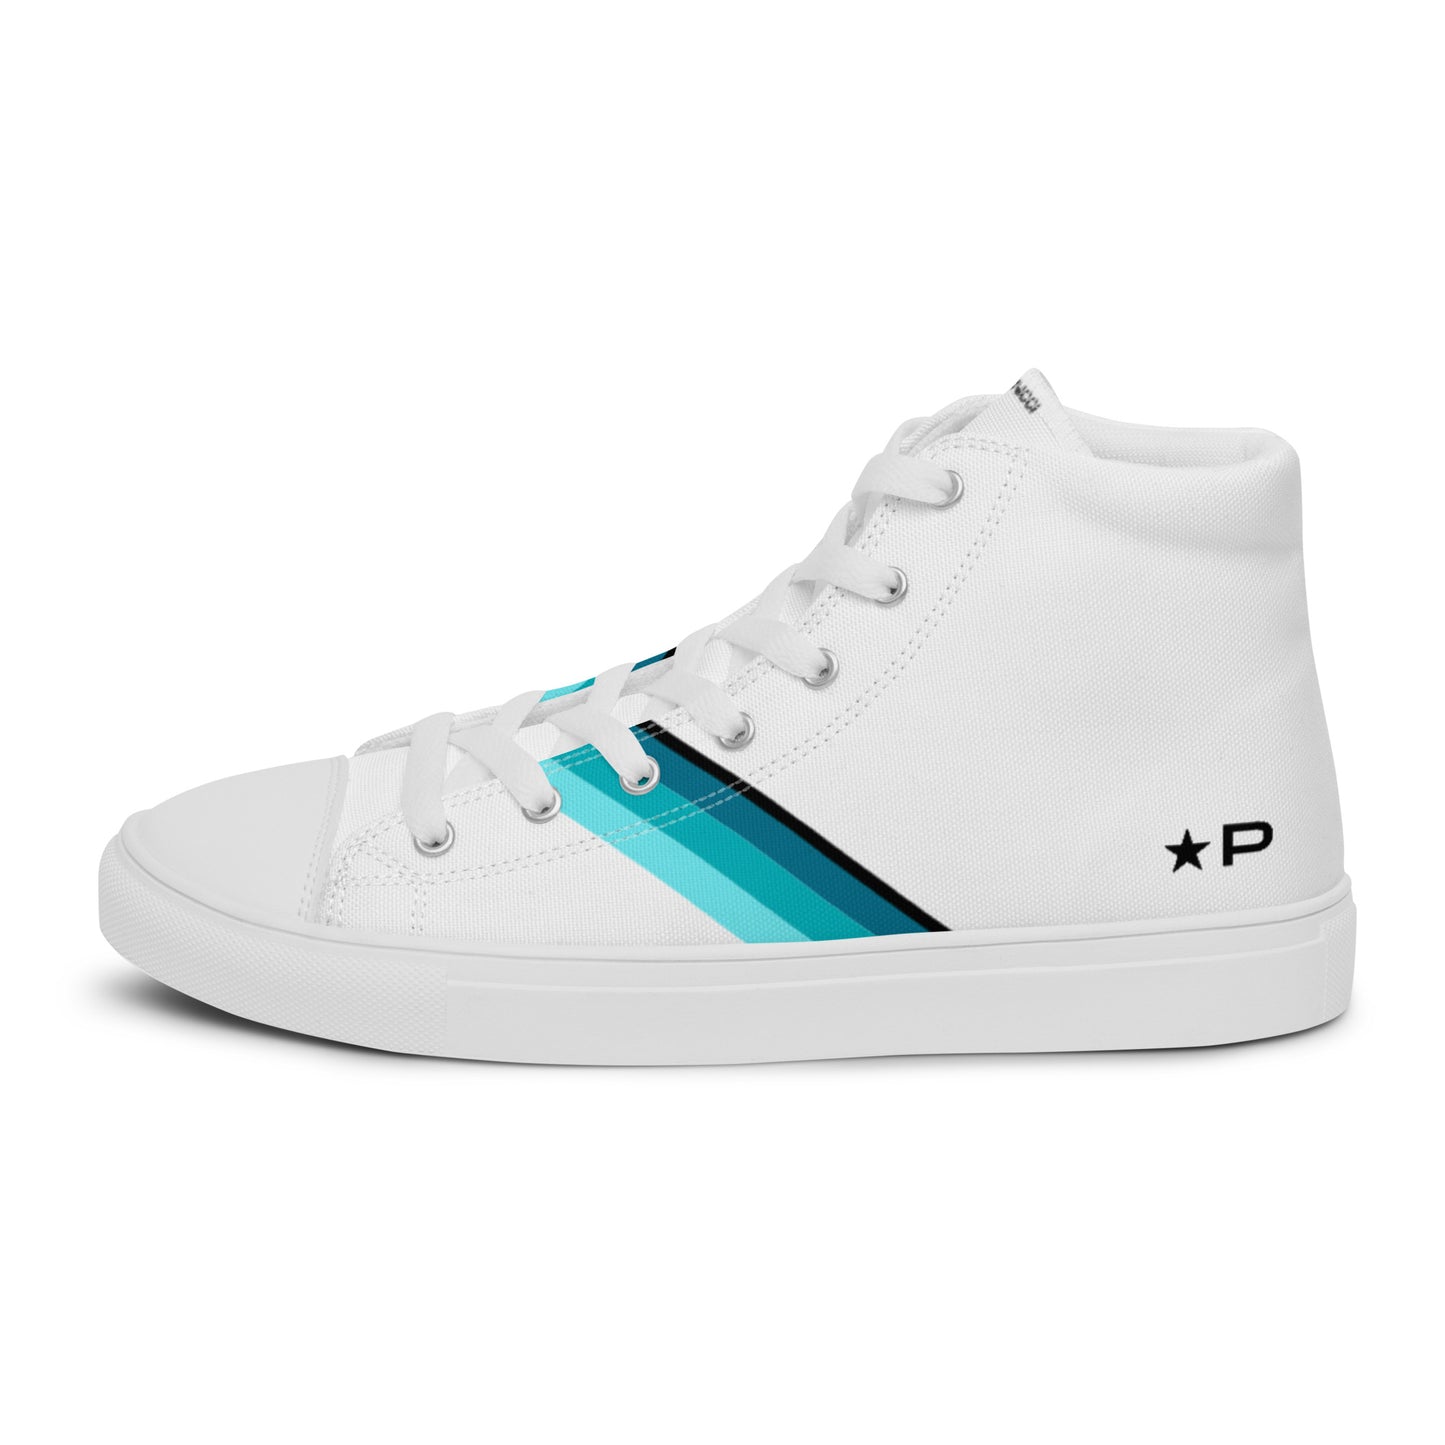 Men’s high top canvas shoes Star P1 WHITE